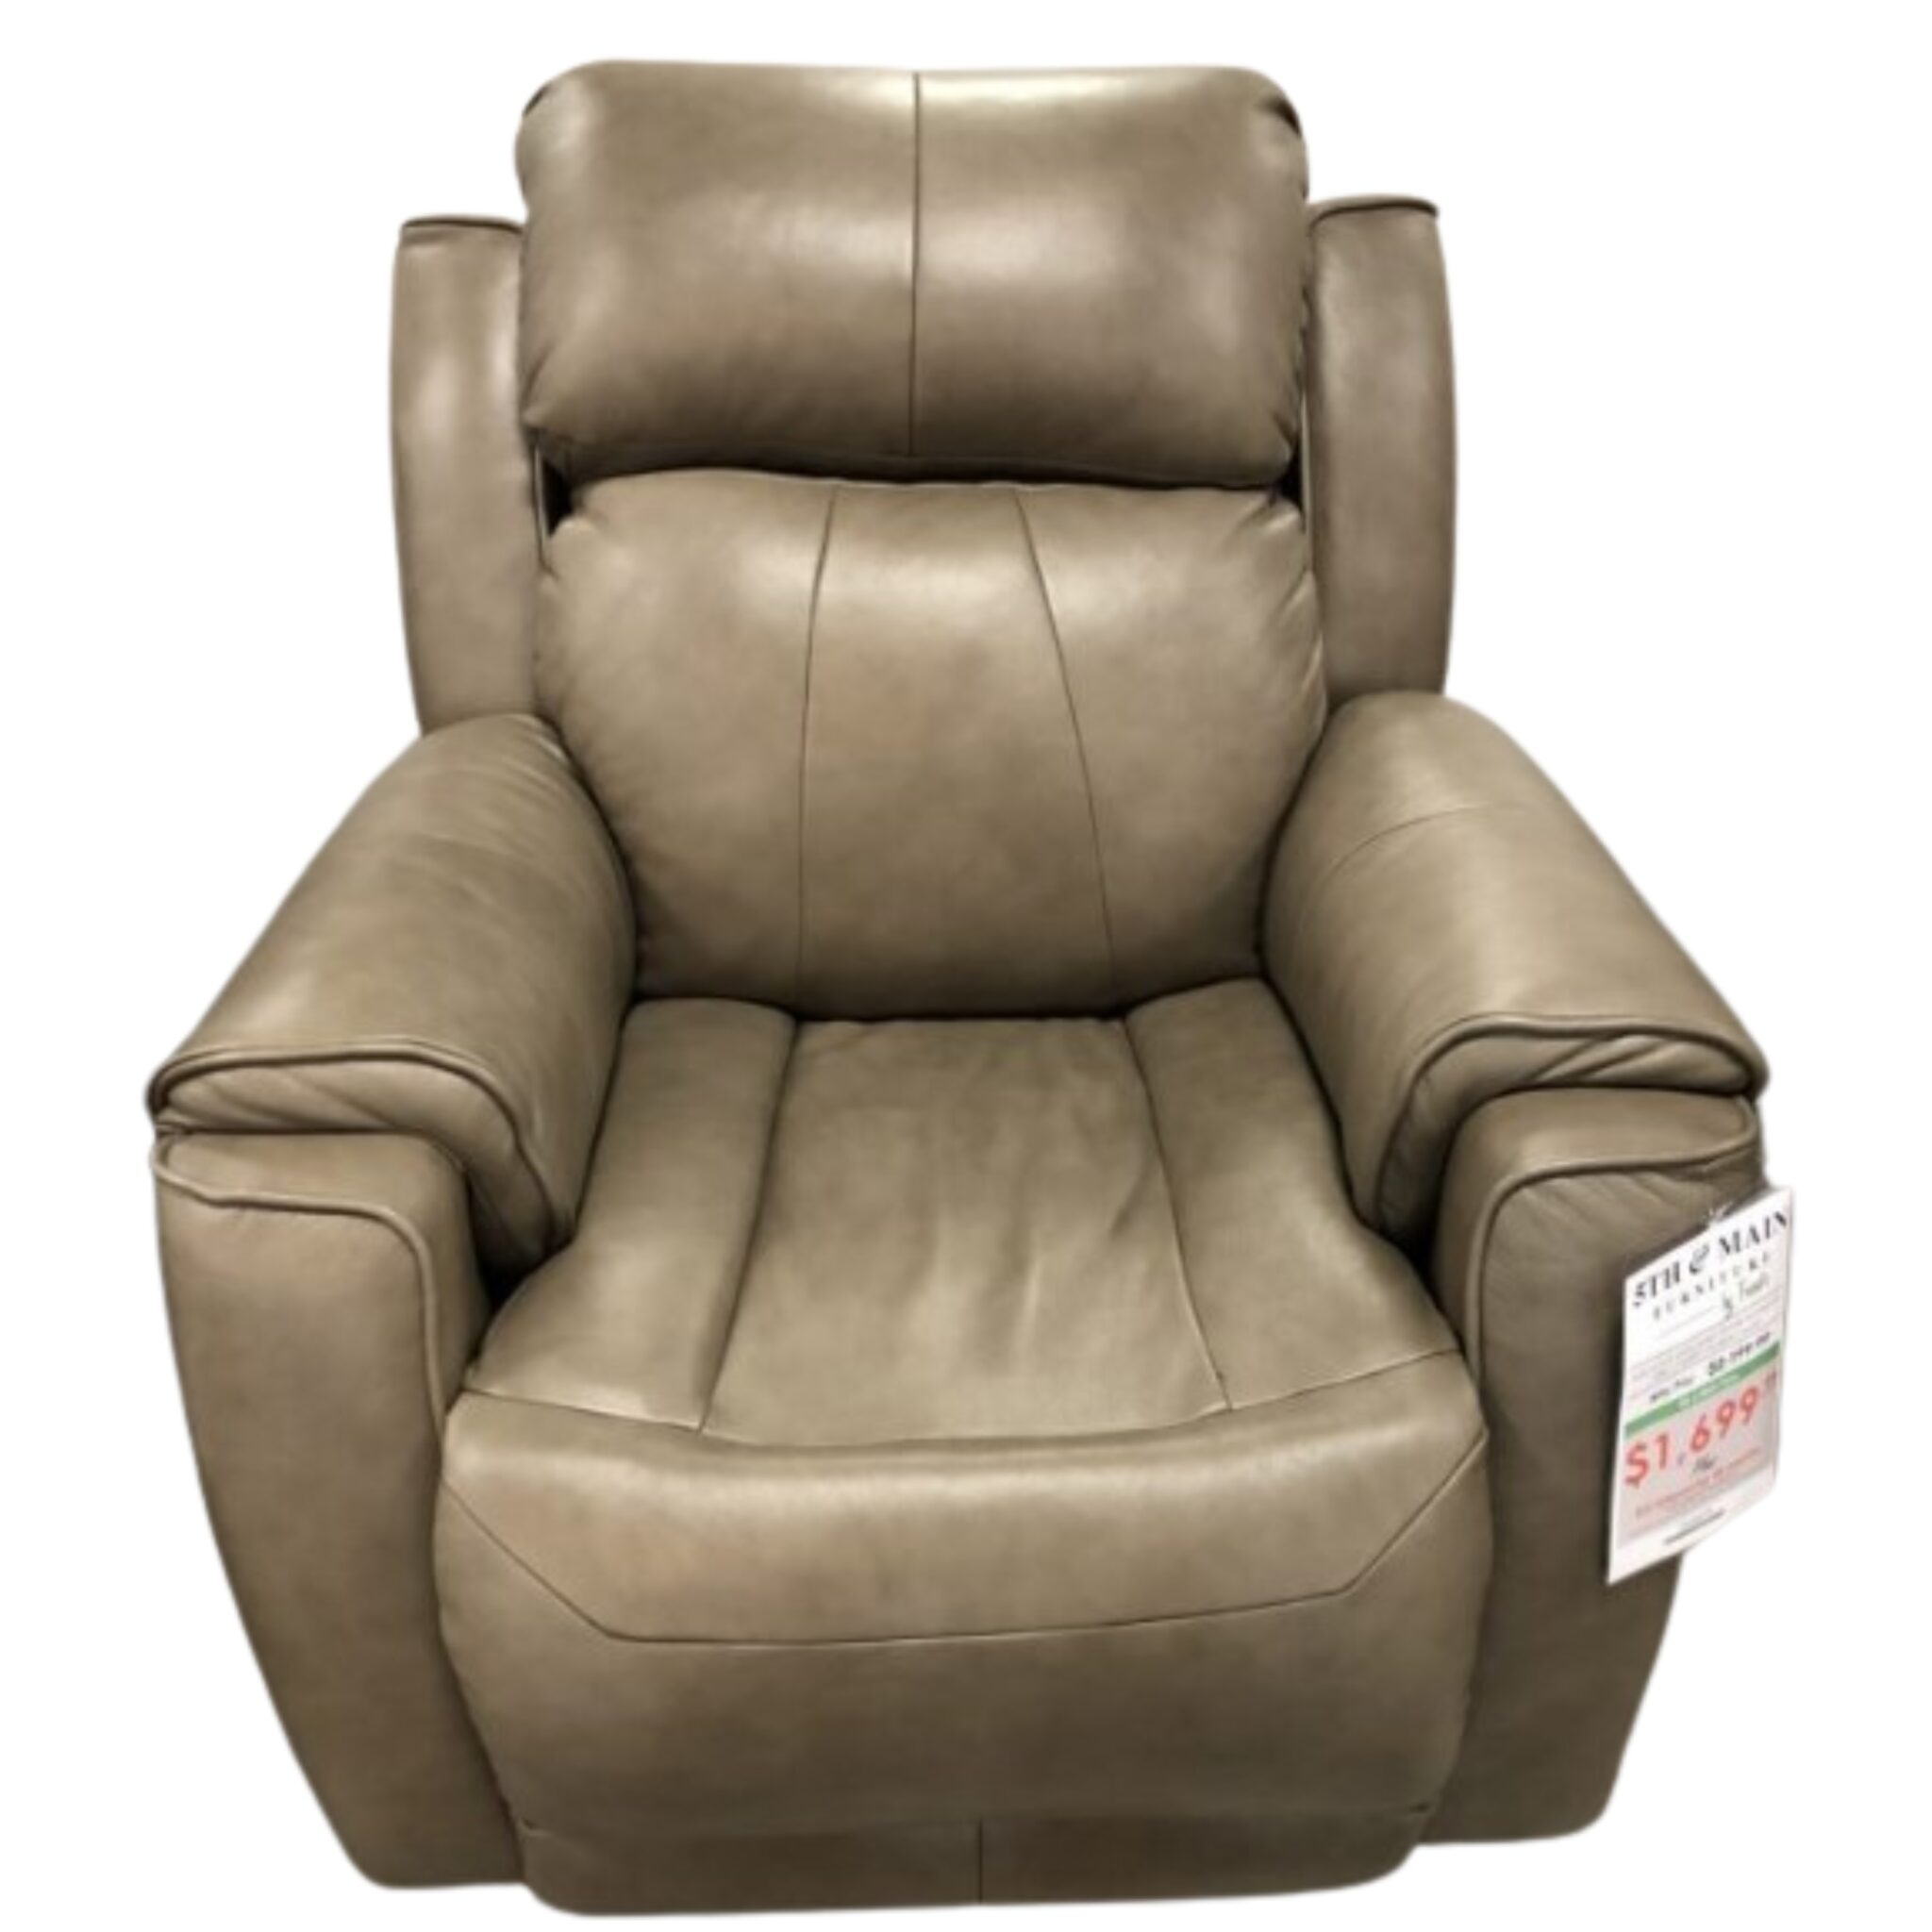 Safe Bet Leather Power Wall-Saver Recliner